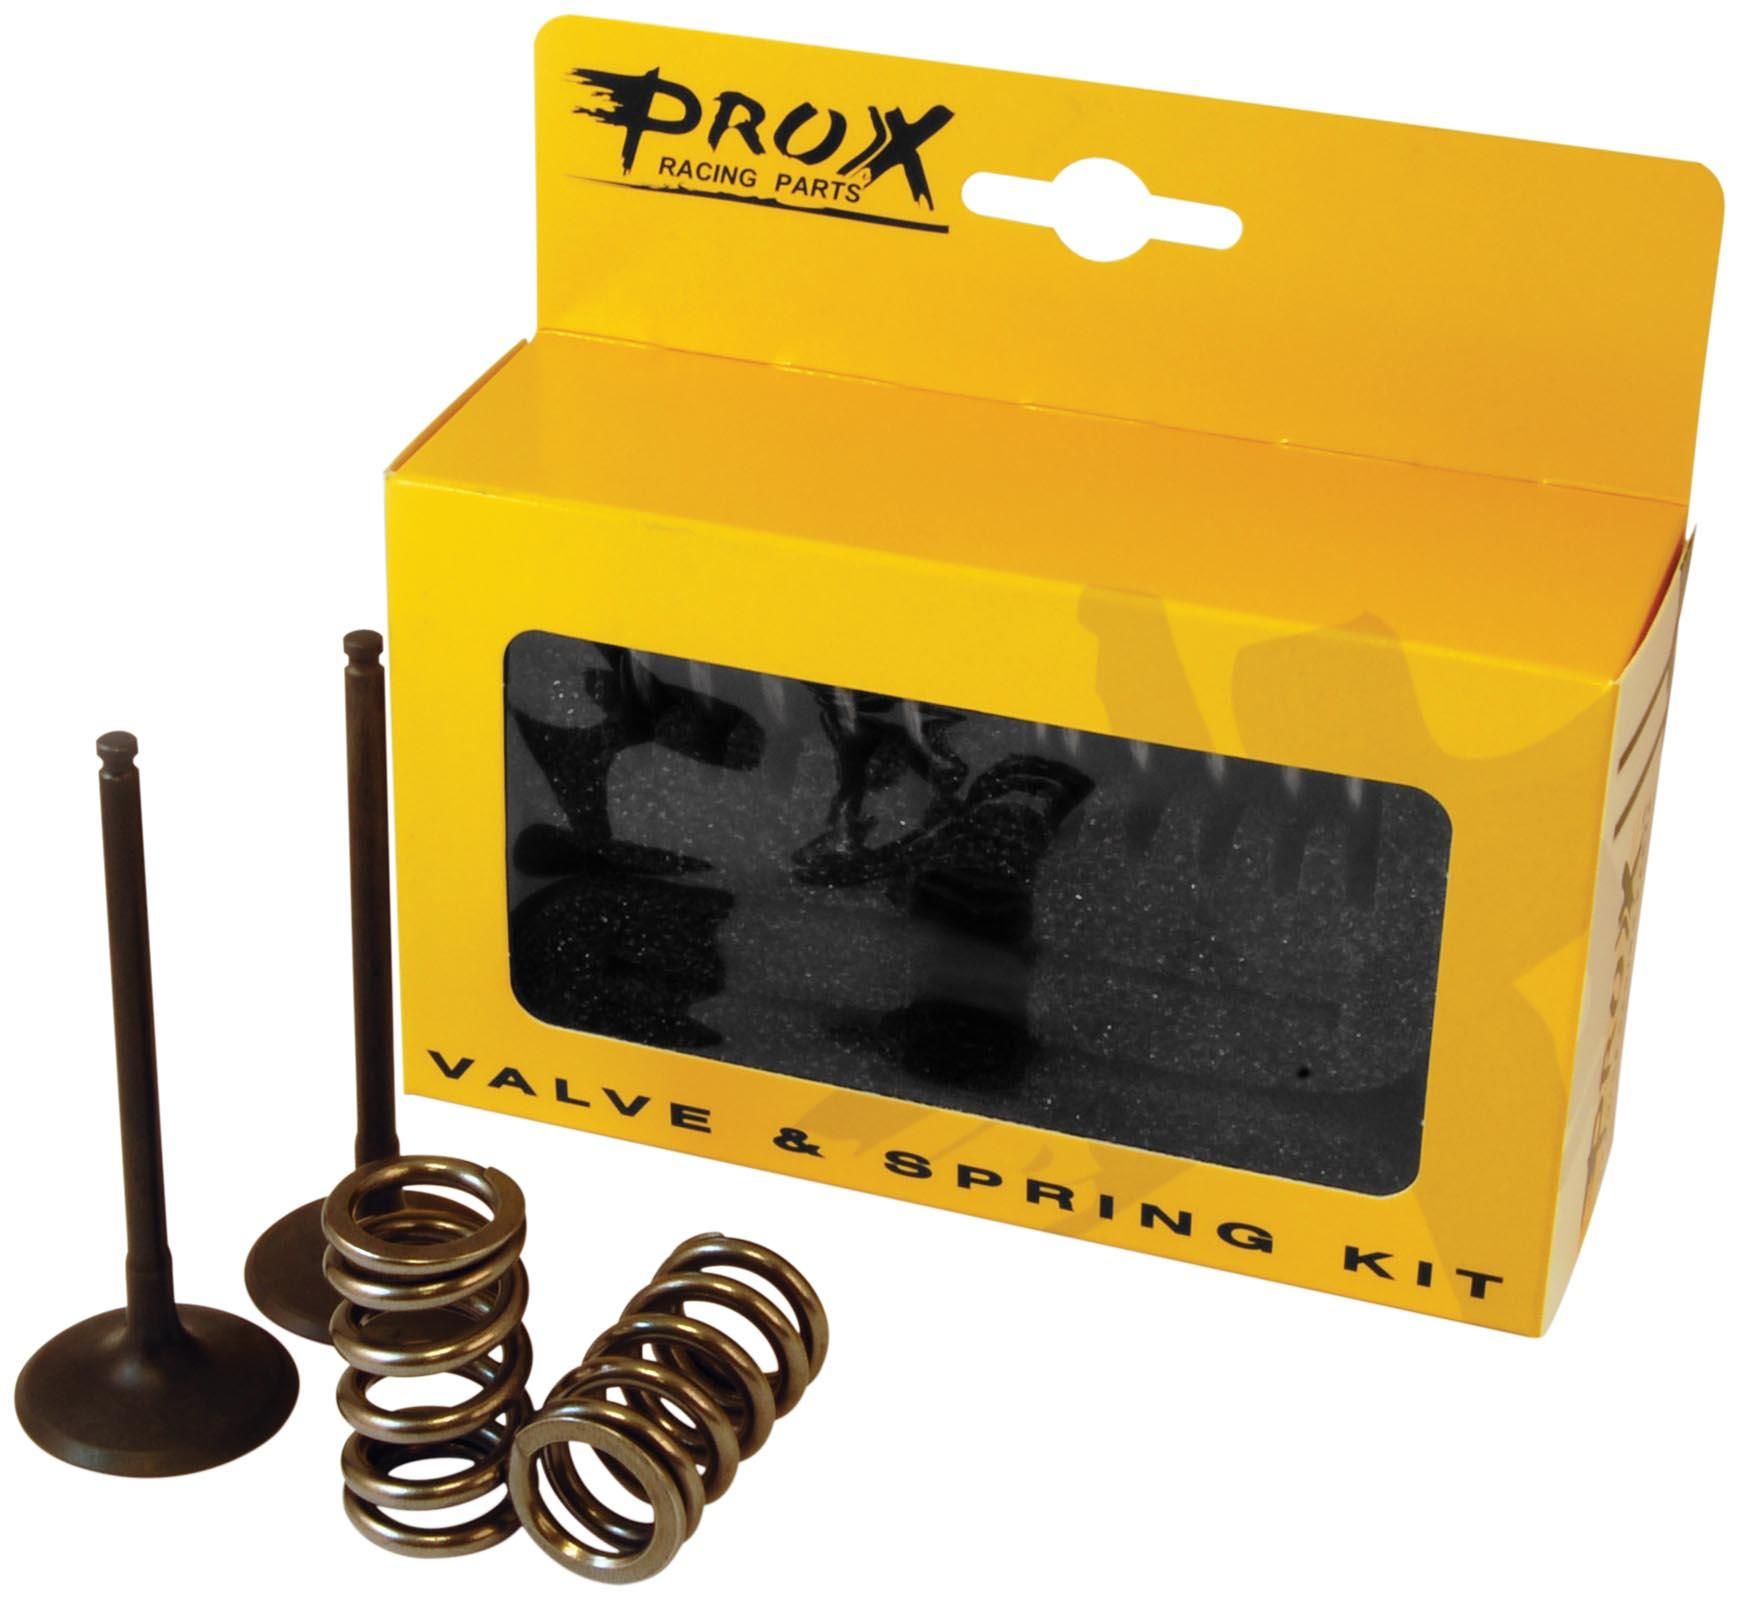 11D3-PROX-28-SES4409-1 Steel Exhaust Valve and Spring Kit